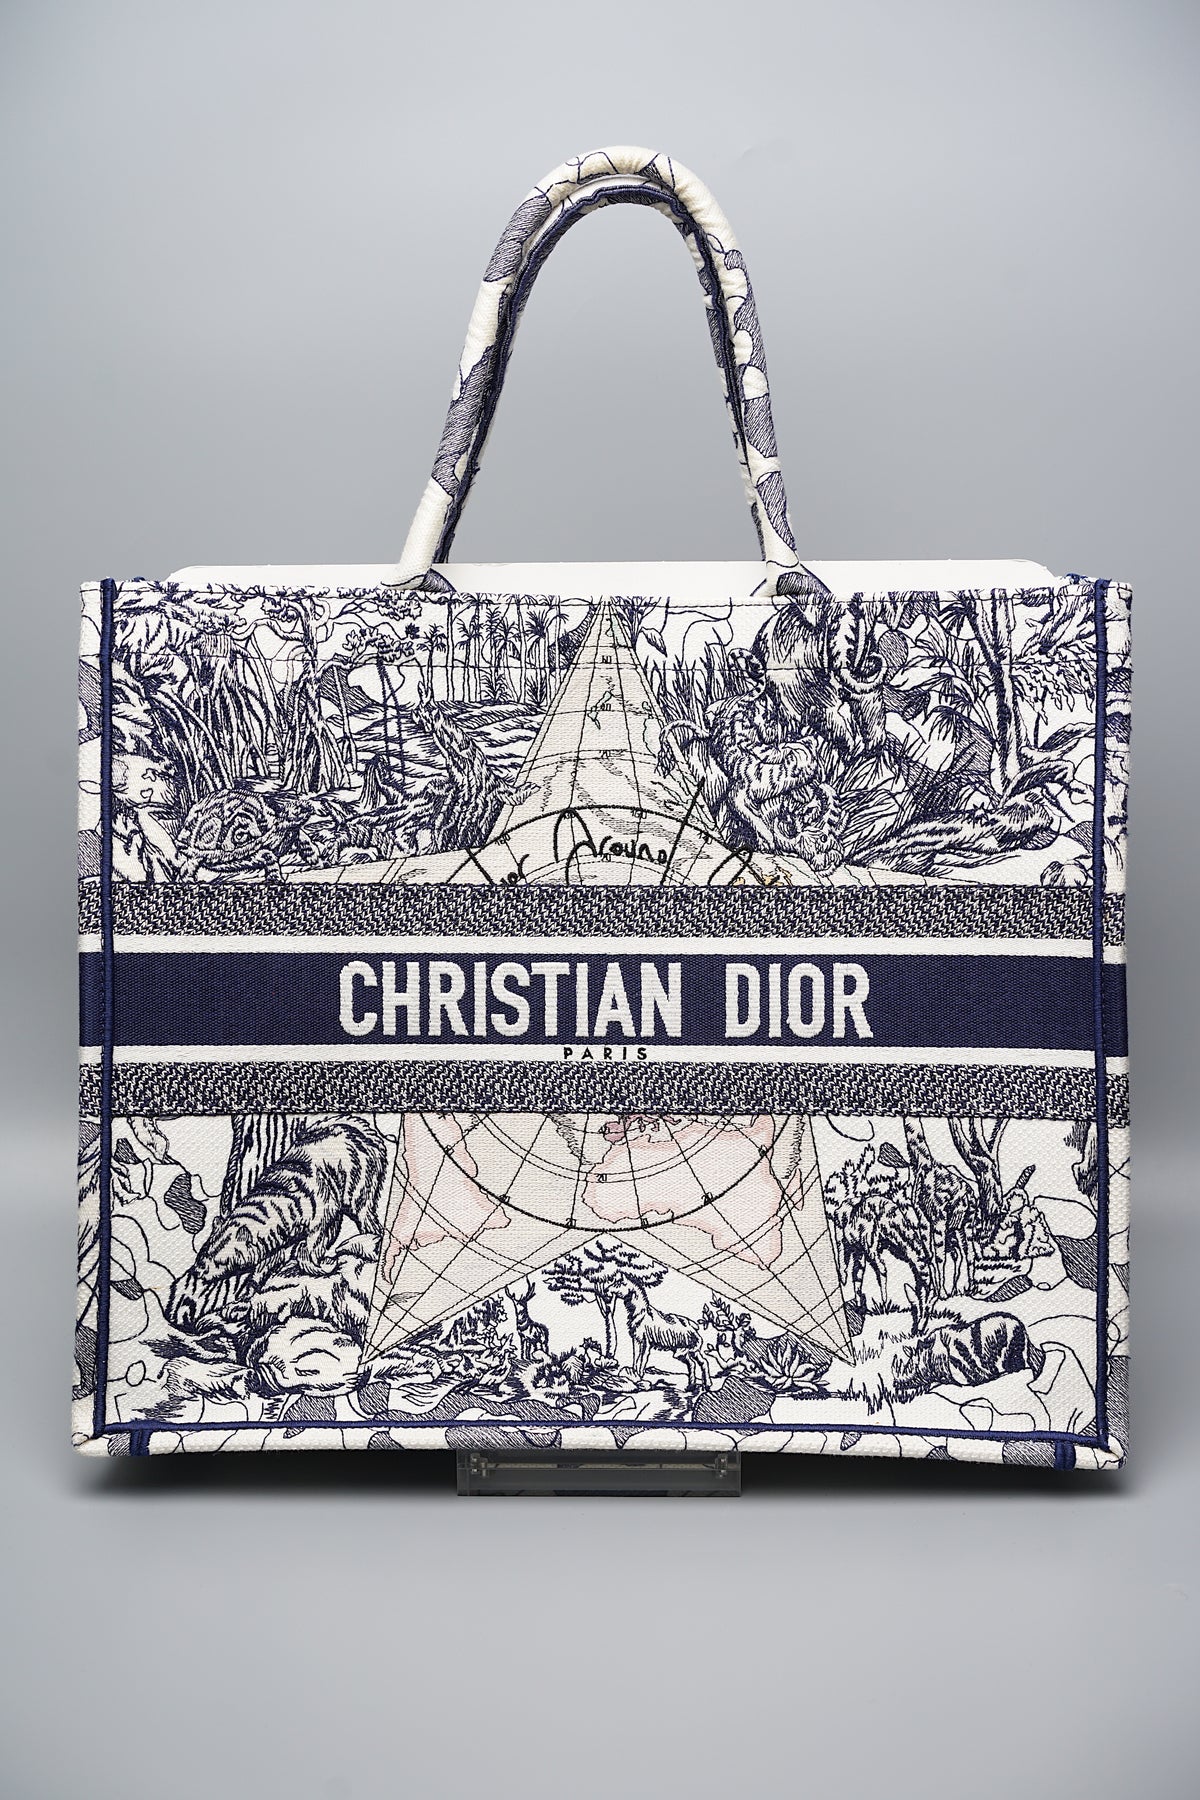 Dior shopping bag Diorbooktote Blue Tiger This BookTote handbag inspired by  the womens creative dir  Shopee Philippines